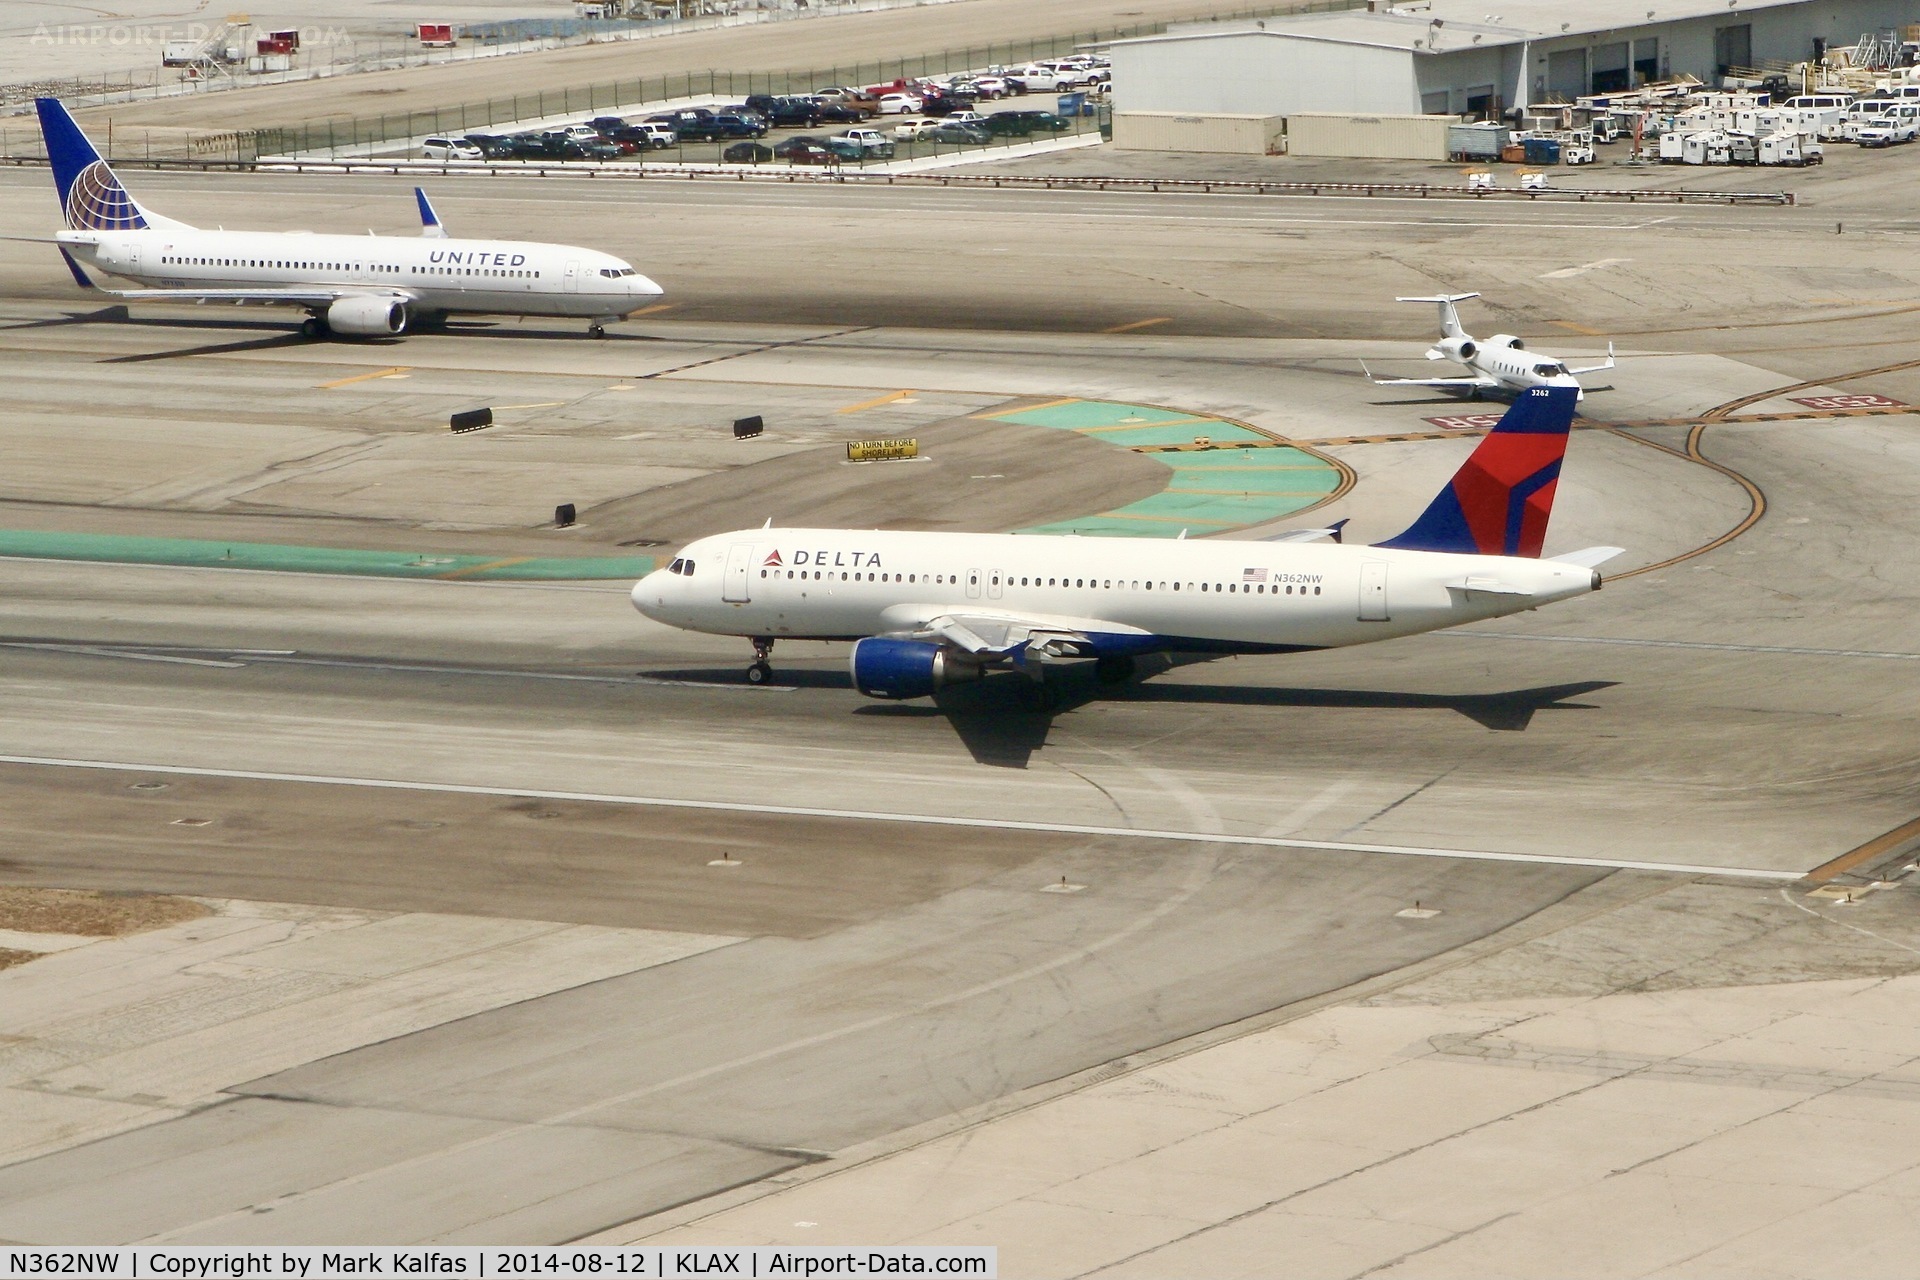 N362NW, 1998 Airbus A320-212 C/N 0911, Delta Airbus A320-212, N362NW lined up for departure on 25R LAX